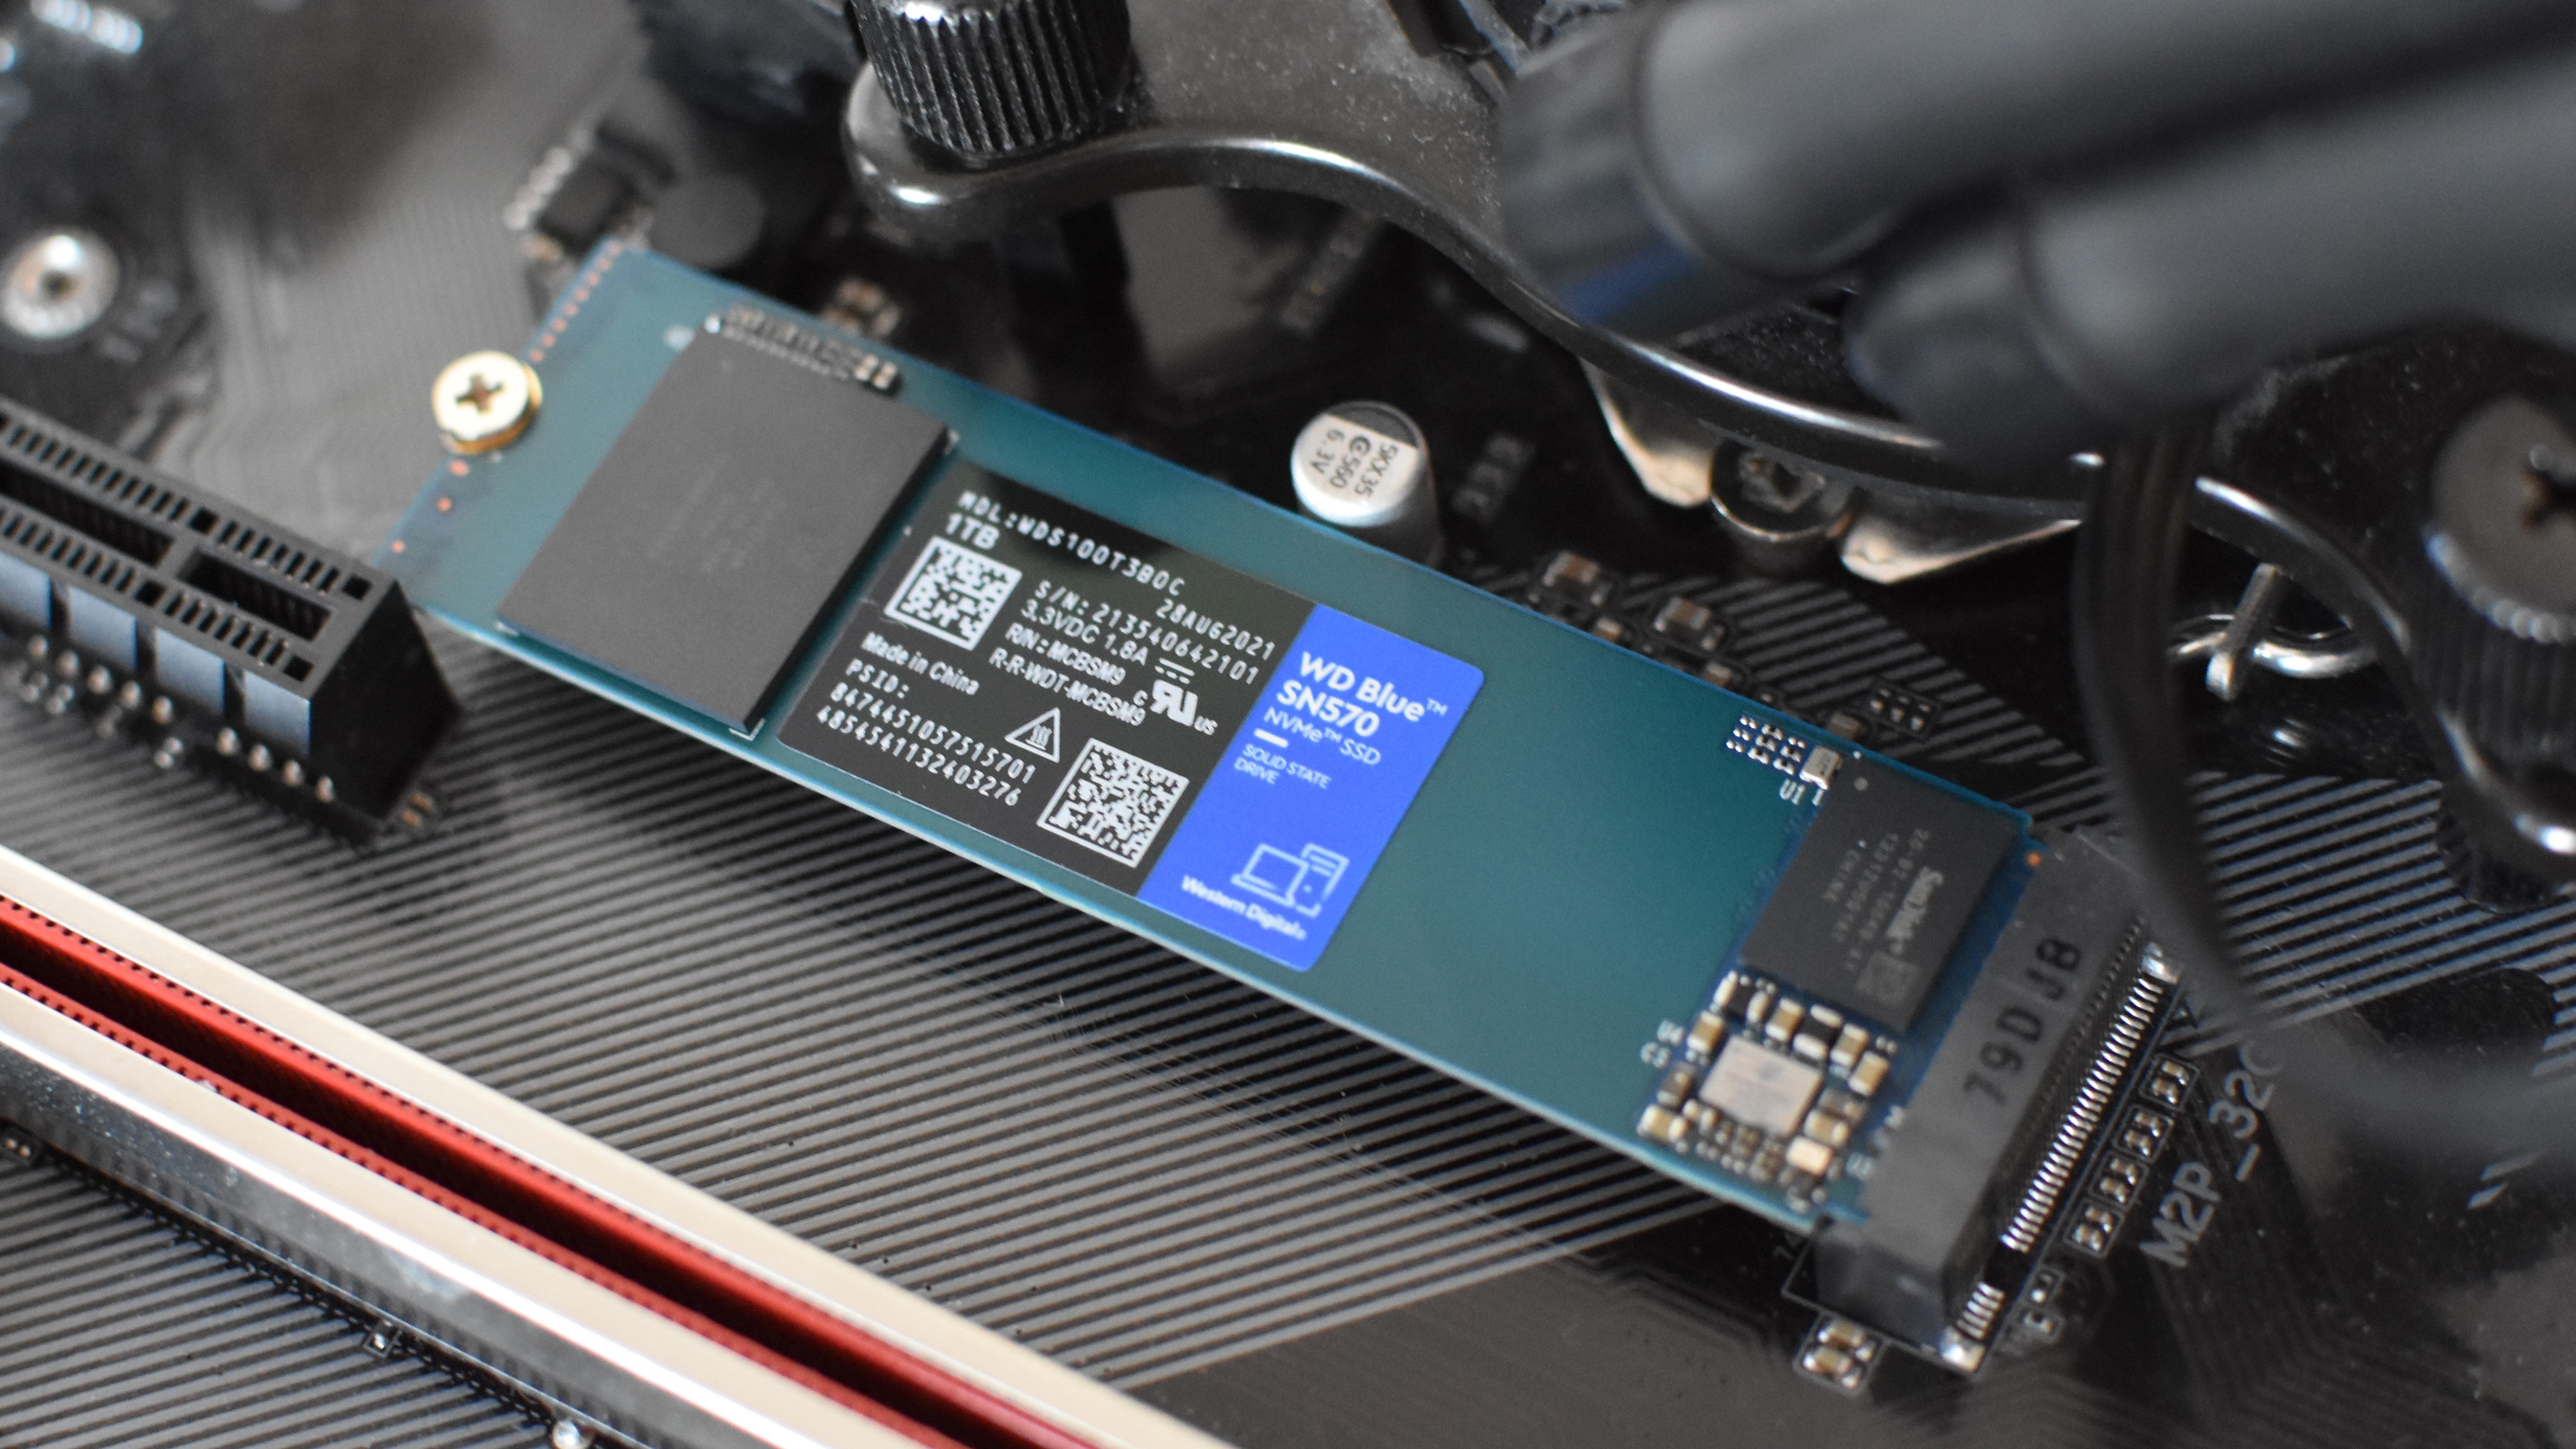 WD Blue SN570 review: The best cheap SSD grows up | Rock Paper Shotgun